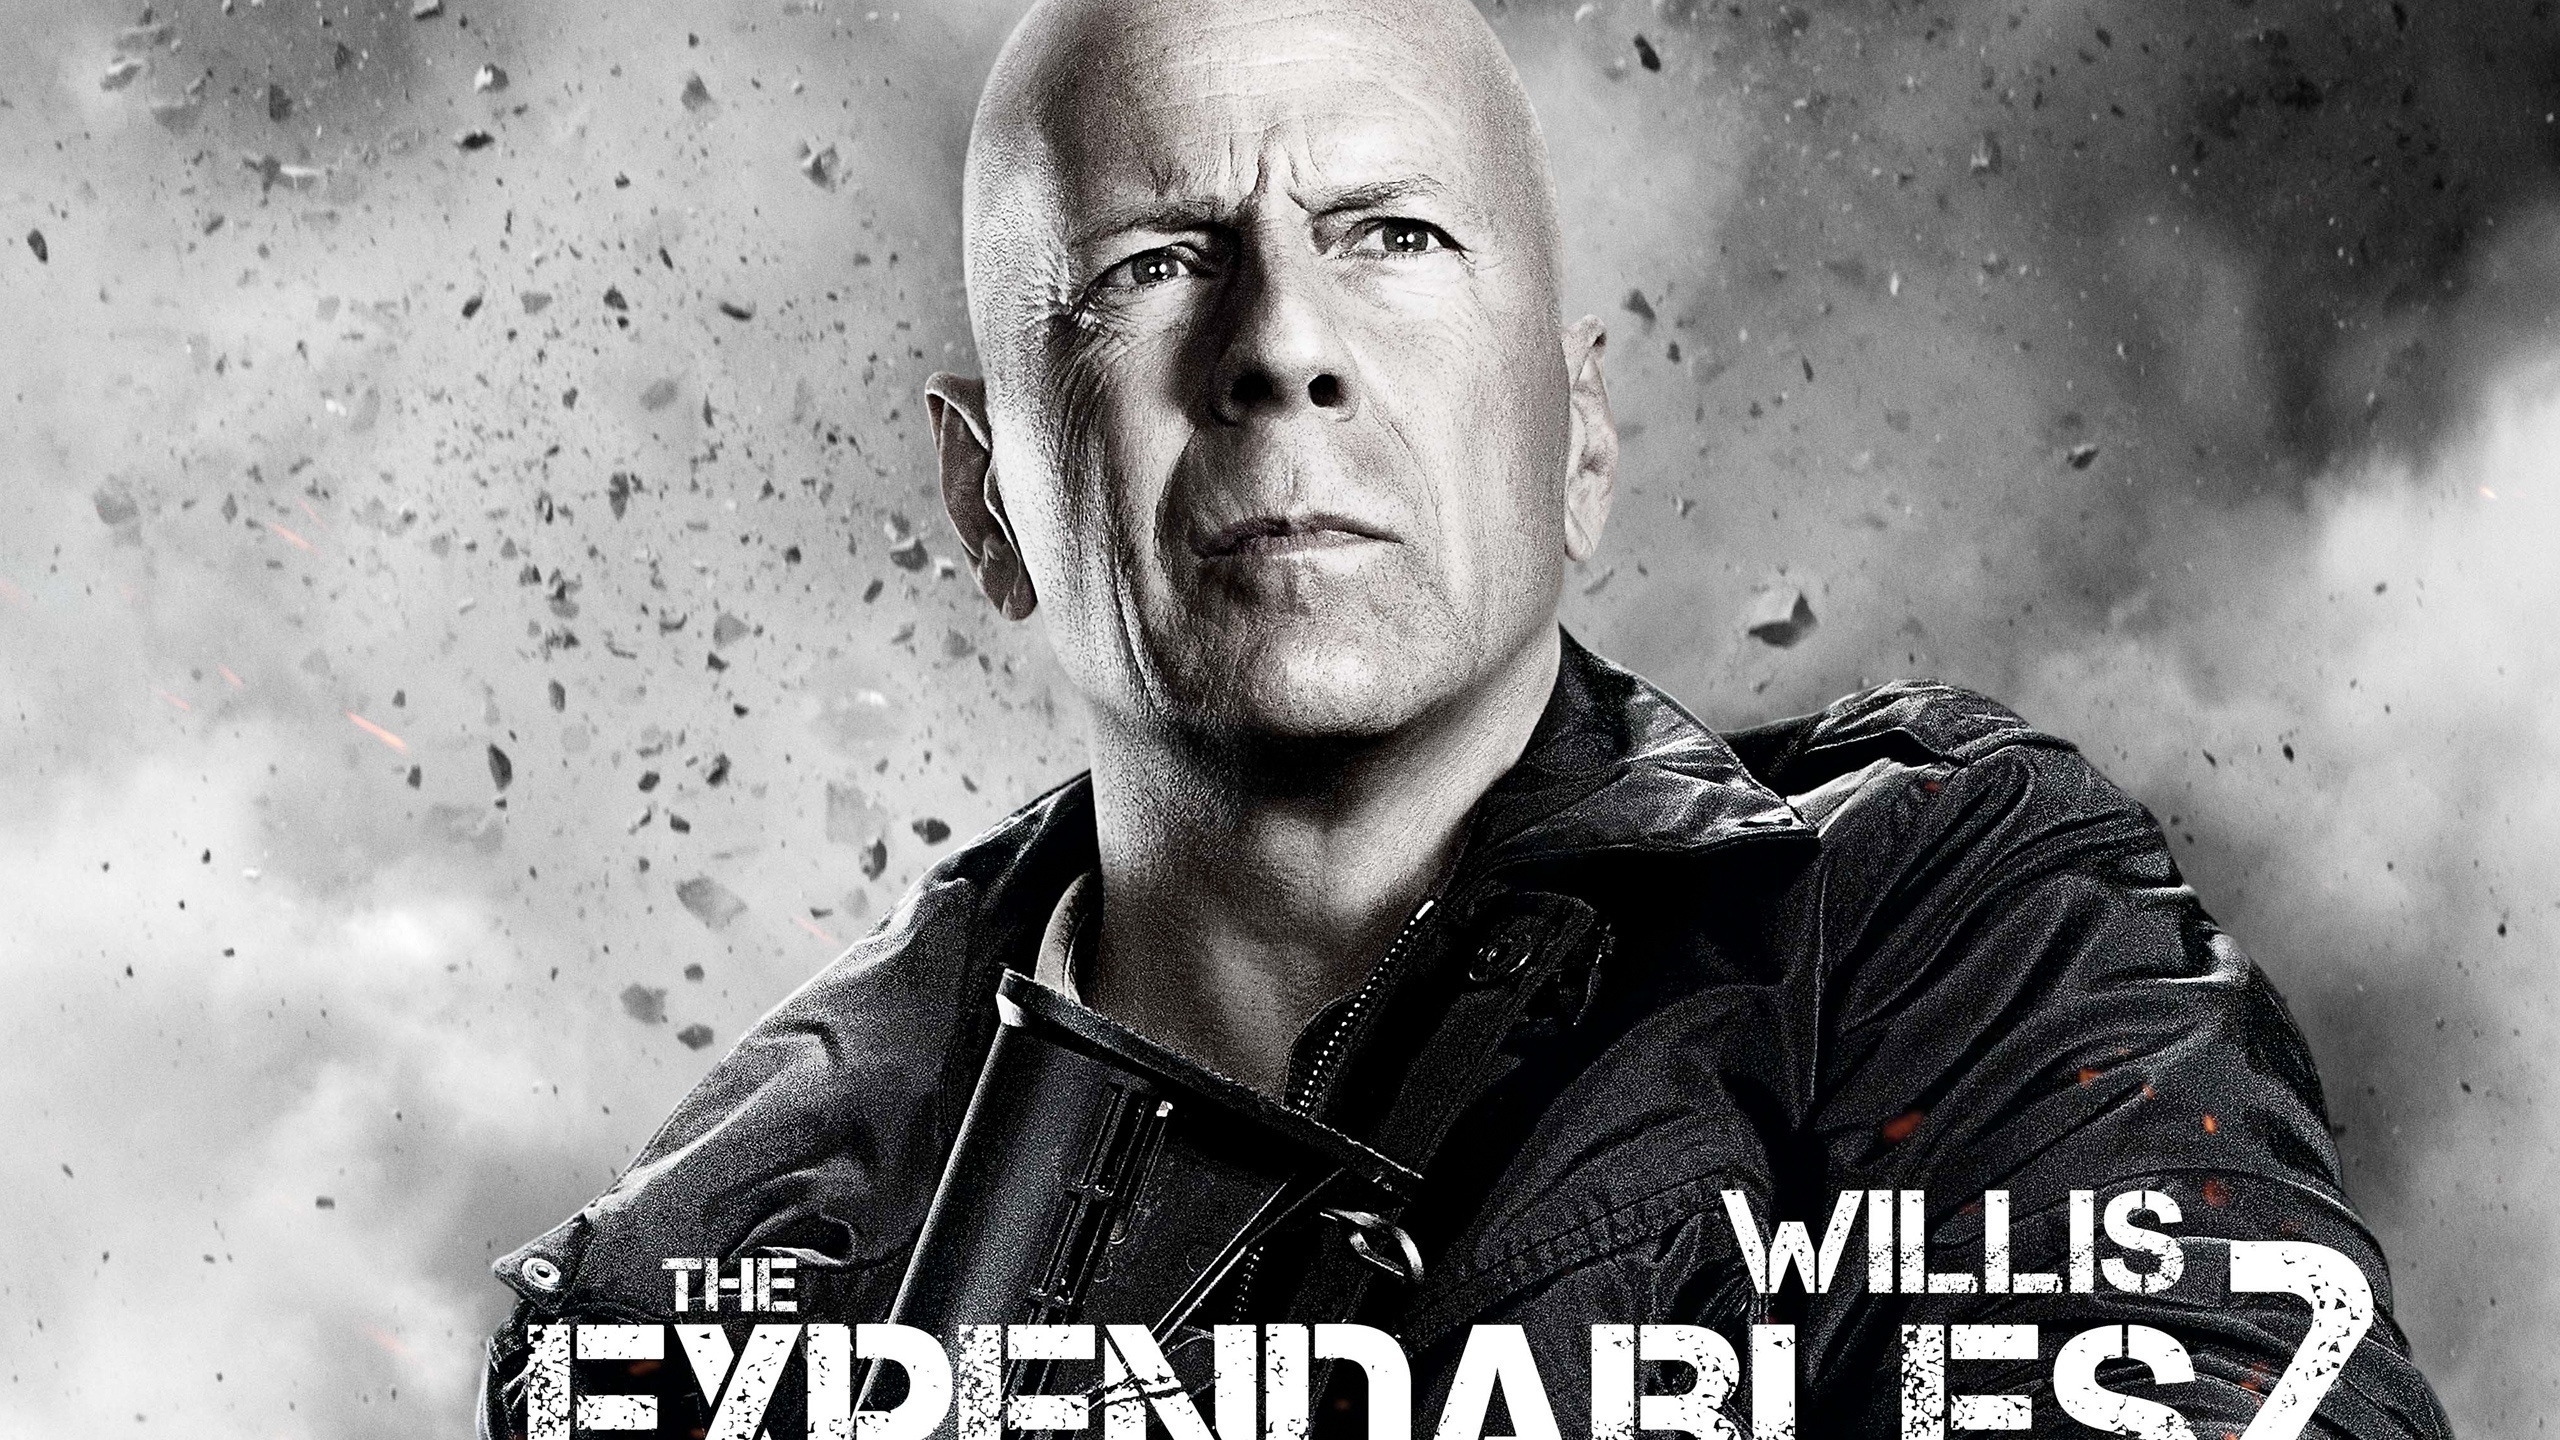 Bruce Willis Expendables 2 for 2560x1440 HDTV resolution